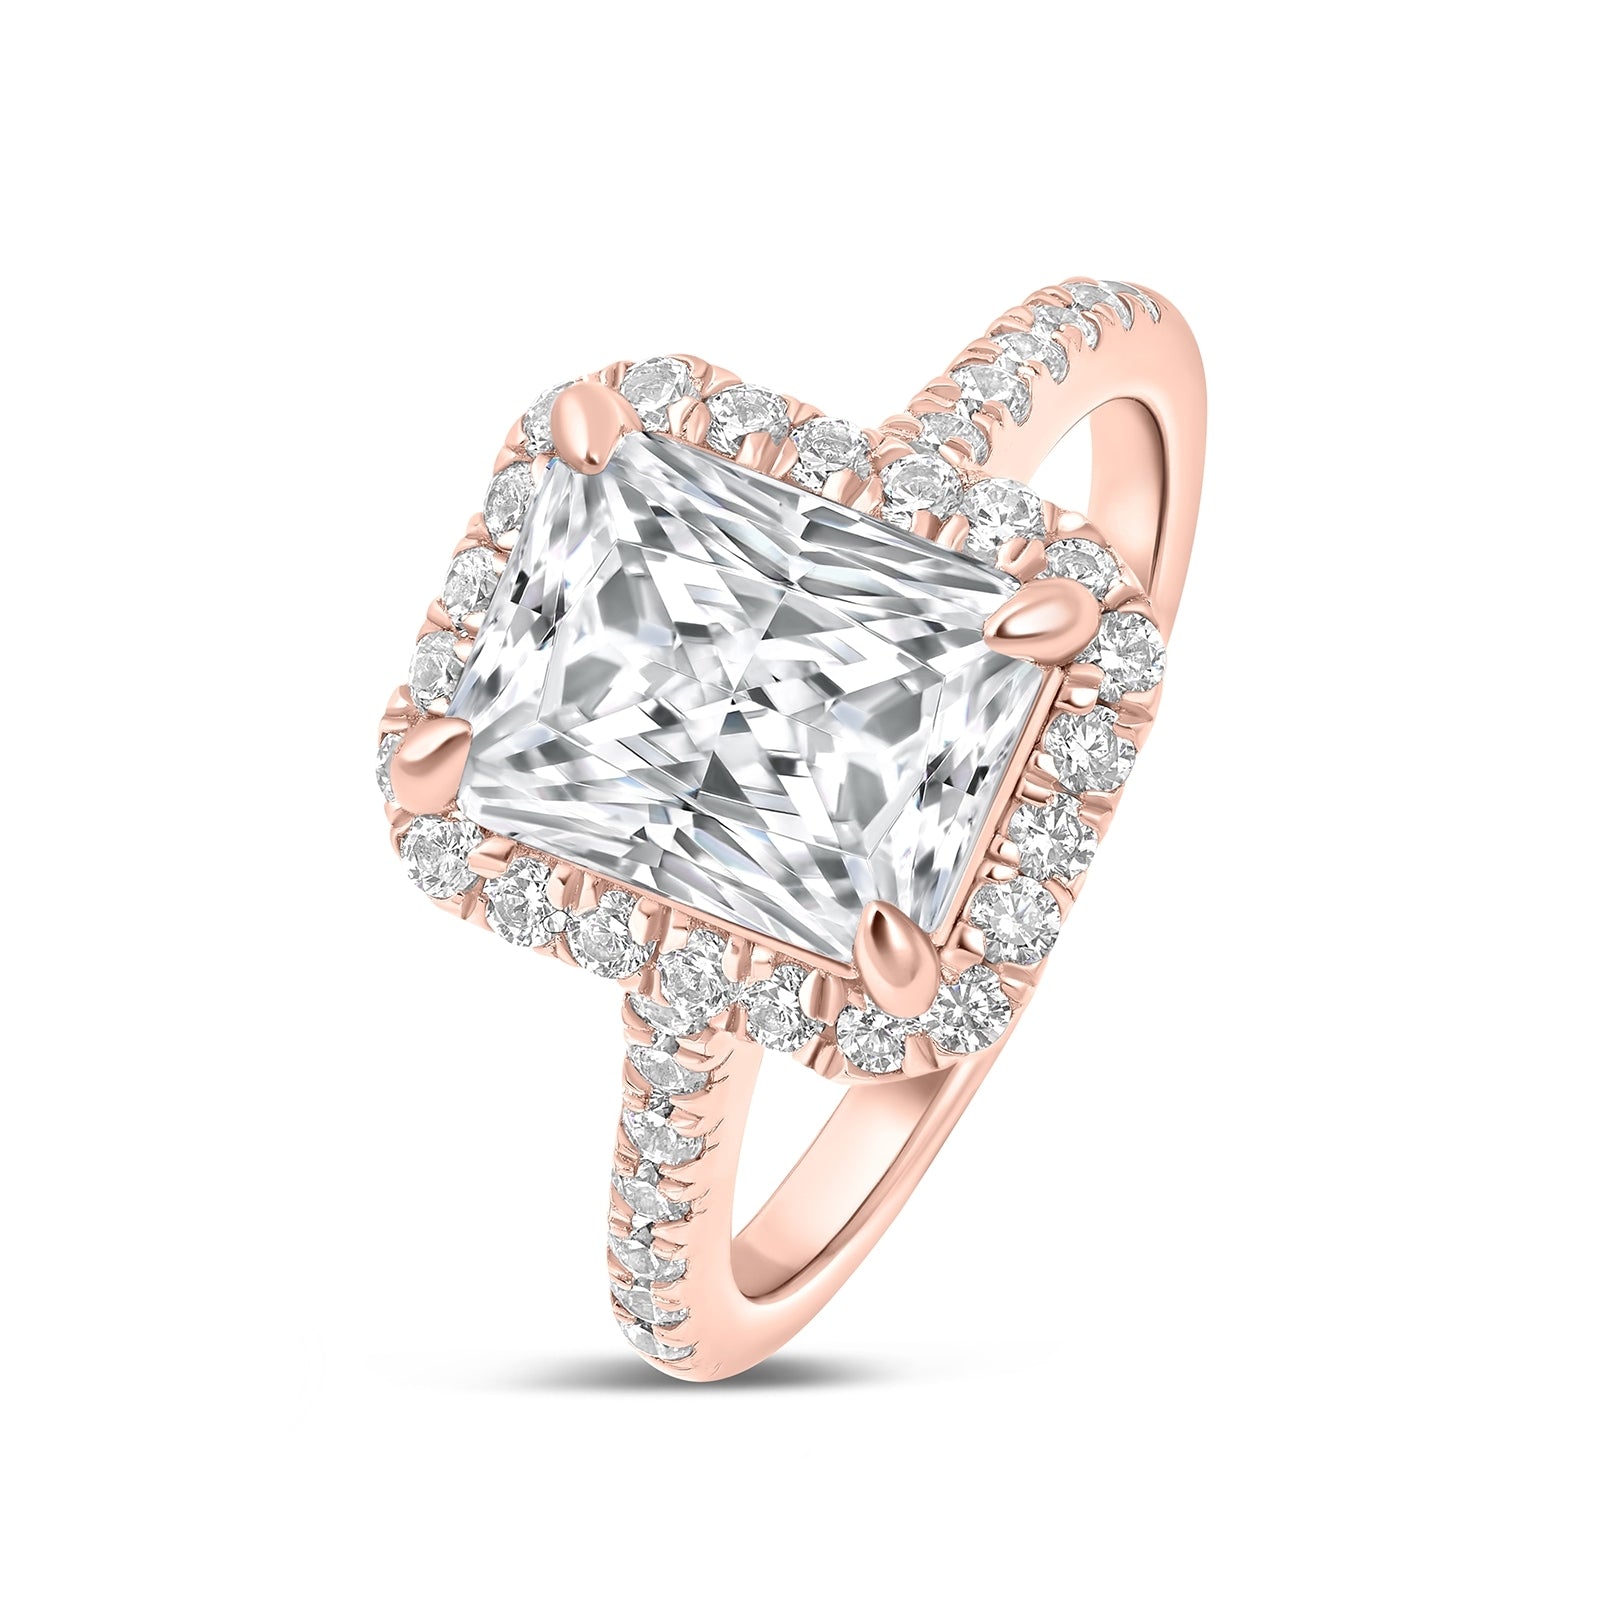 rose gold radiant cut engagement ring with halo and half eternity band positioned at a slight angle to show ring detailing